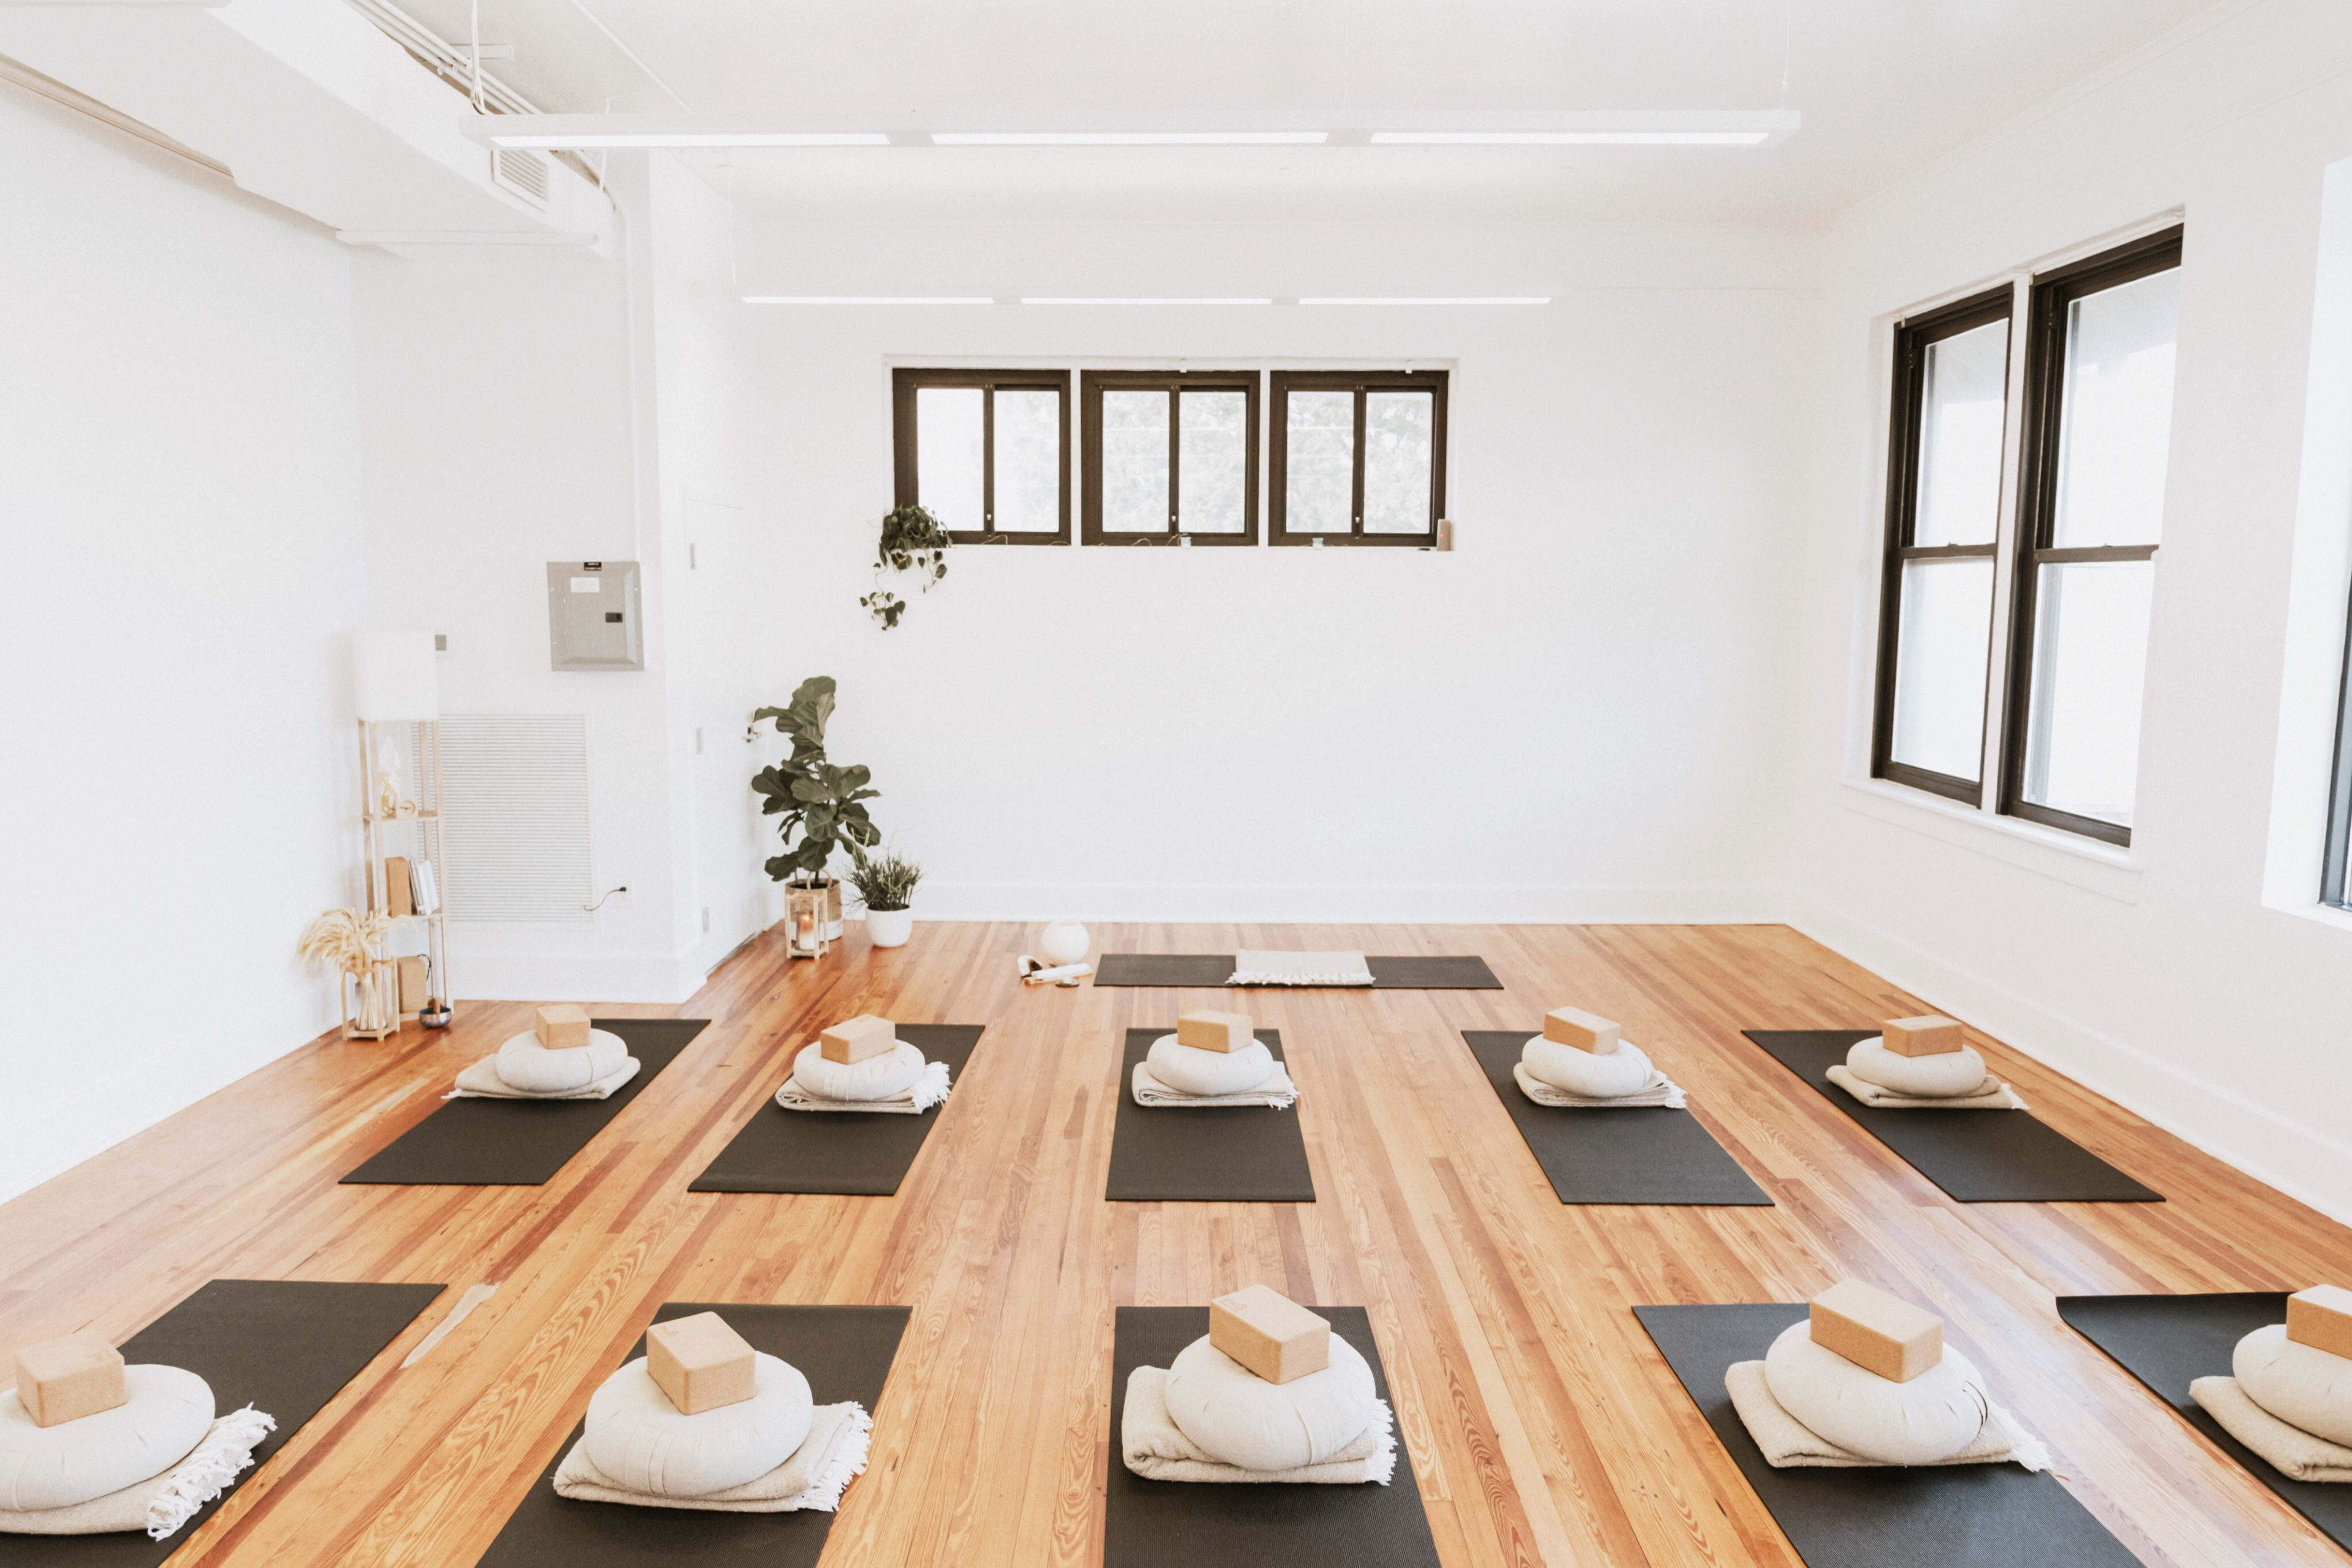 The BEST 10 Yoga Studio spaces for rent near me